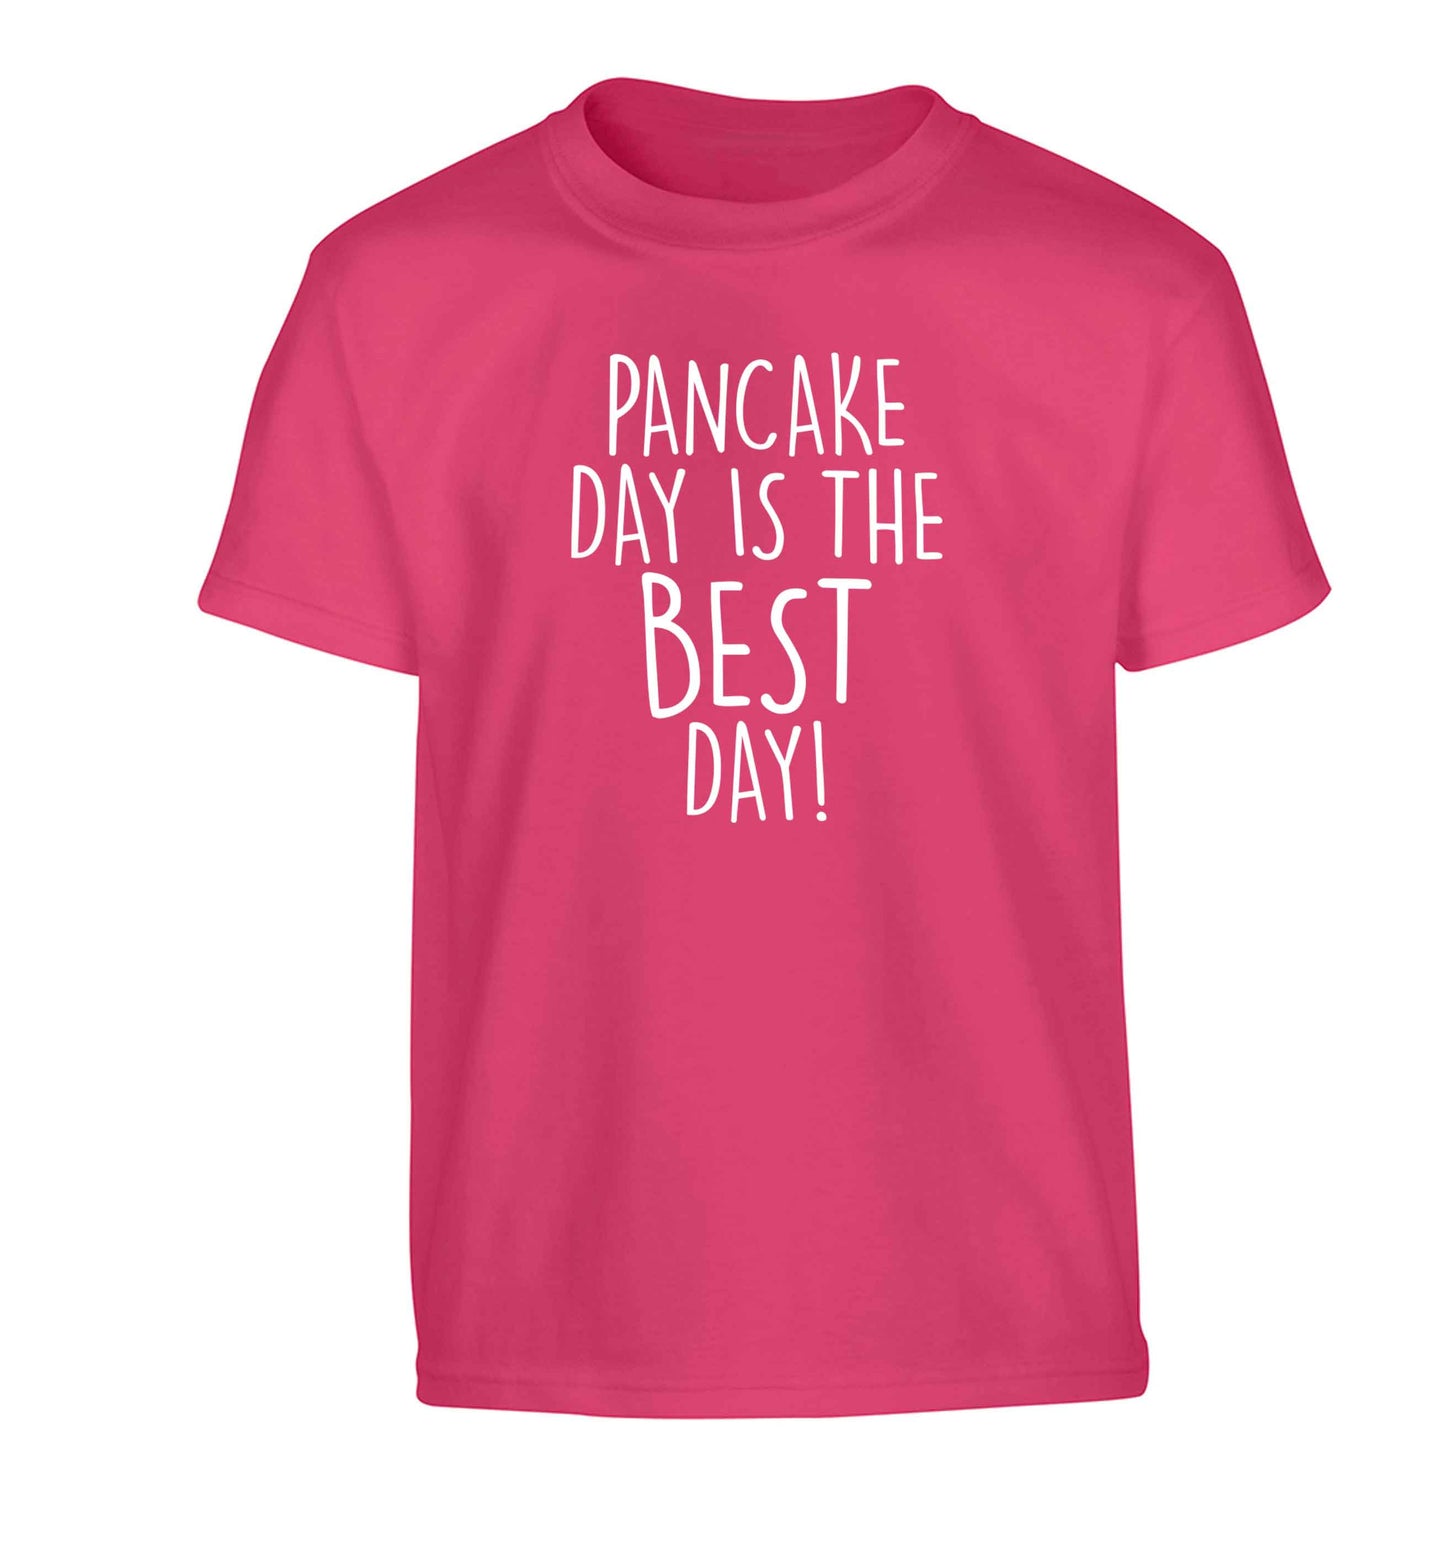 Pancake day is the best day Children's pink Tshirt 12-13 Years